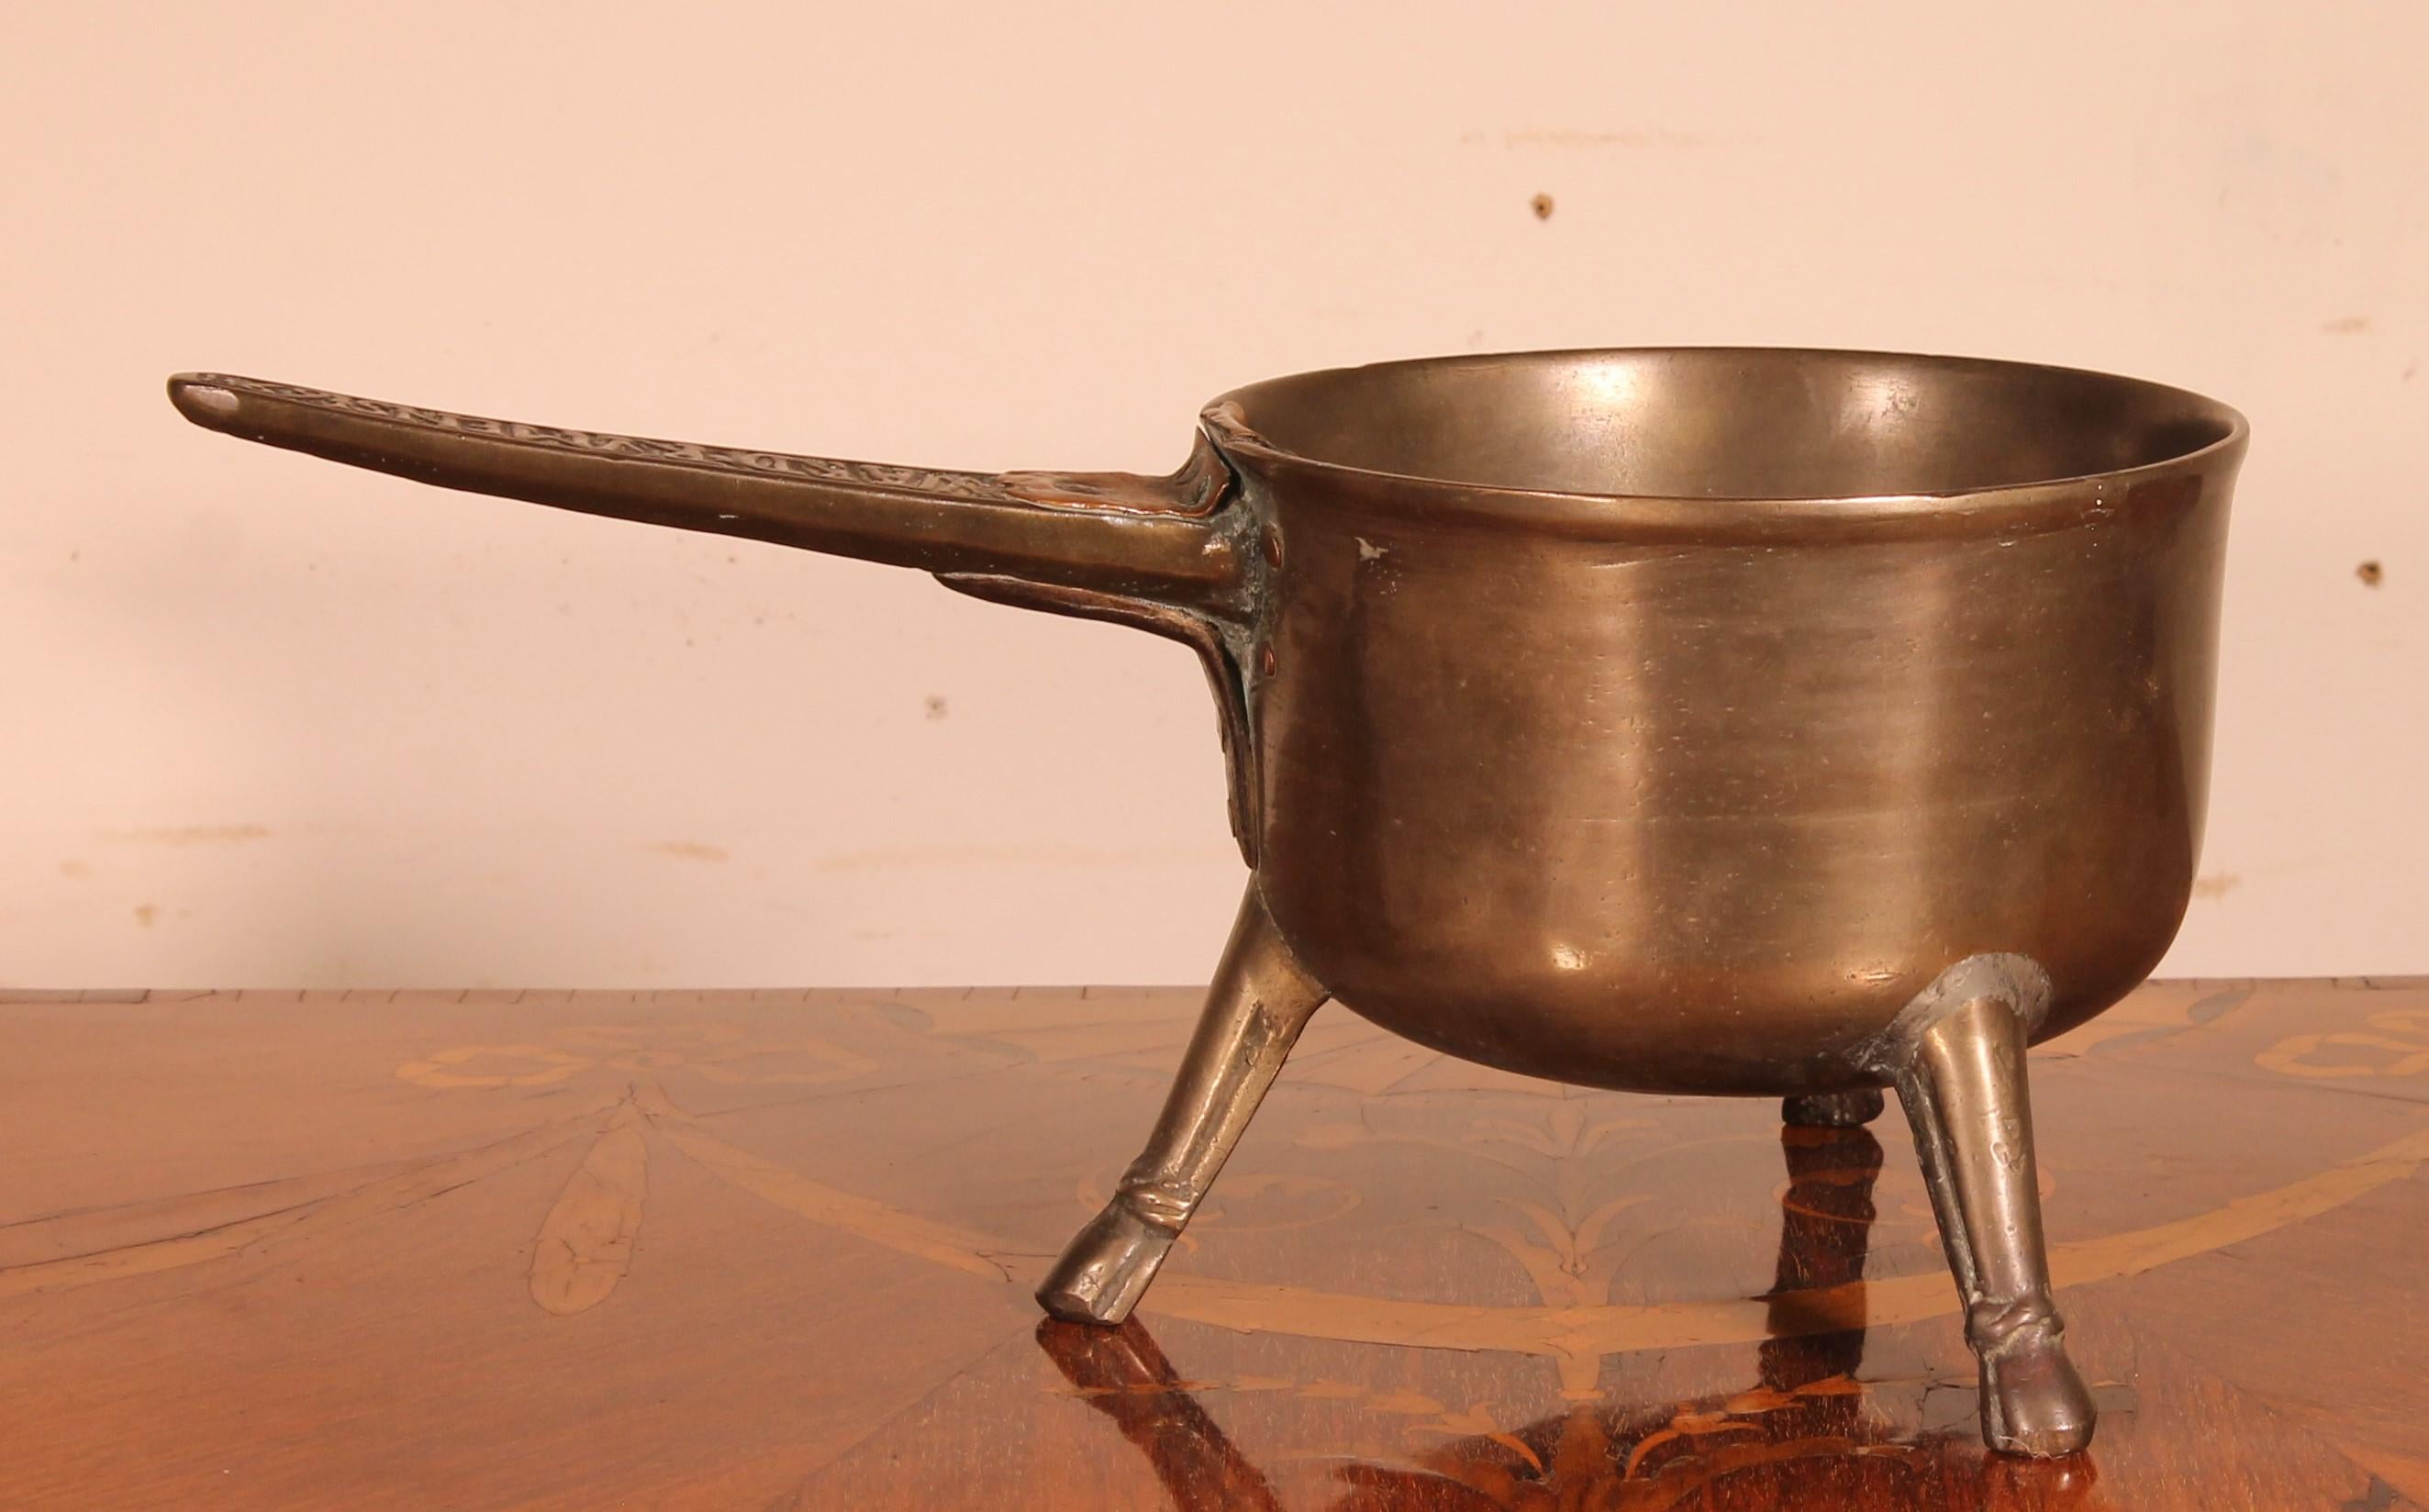 Georgian 17th Century Tripod Apothecary Skillet Dated 1698 from The Ward Rvmens Family For Sale